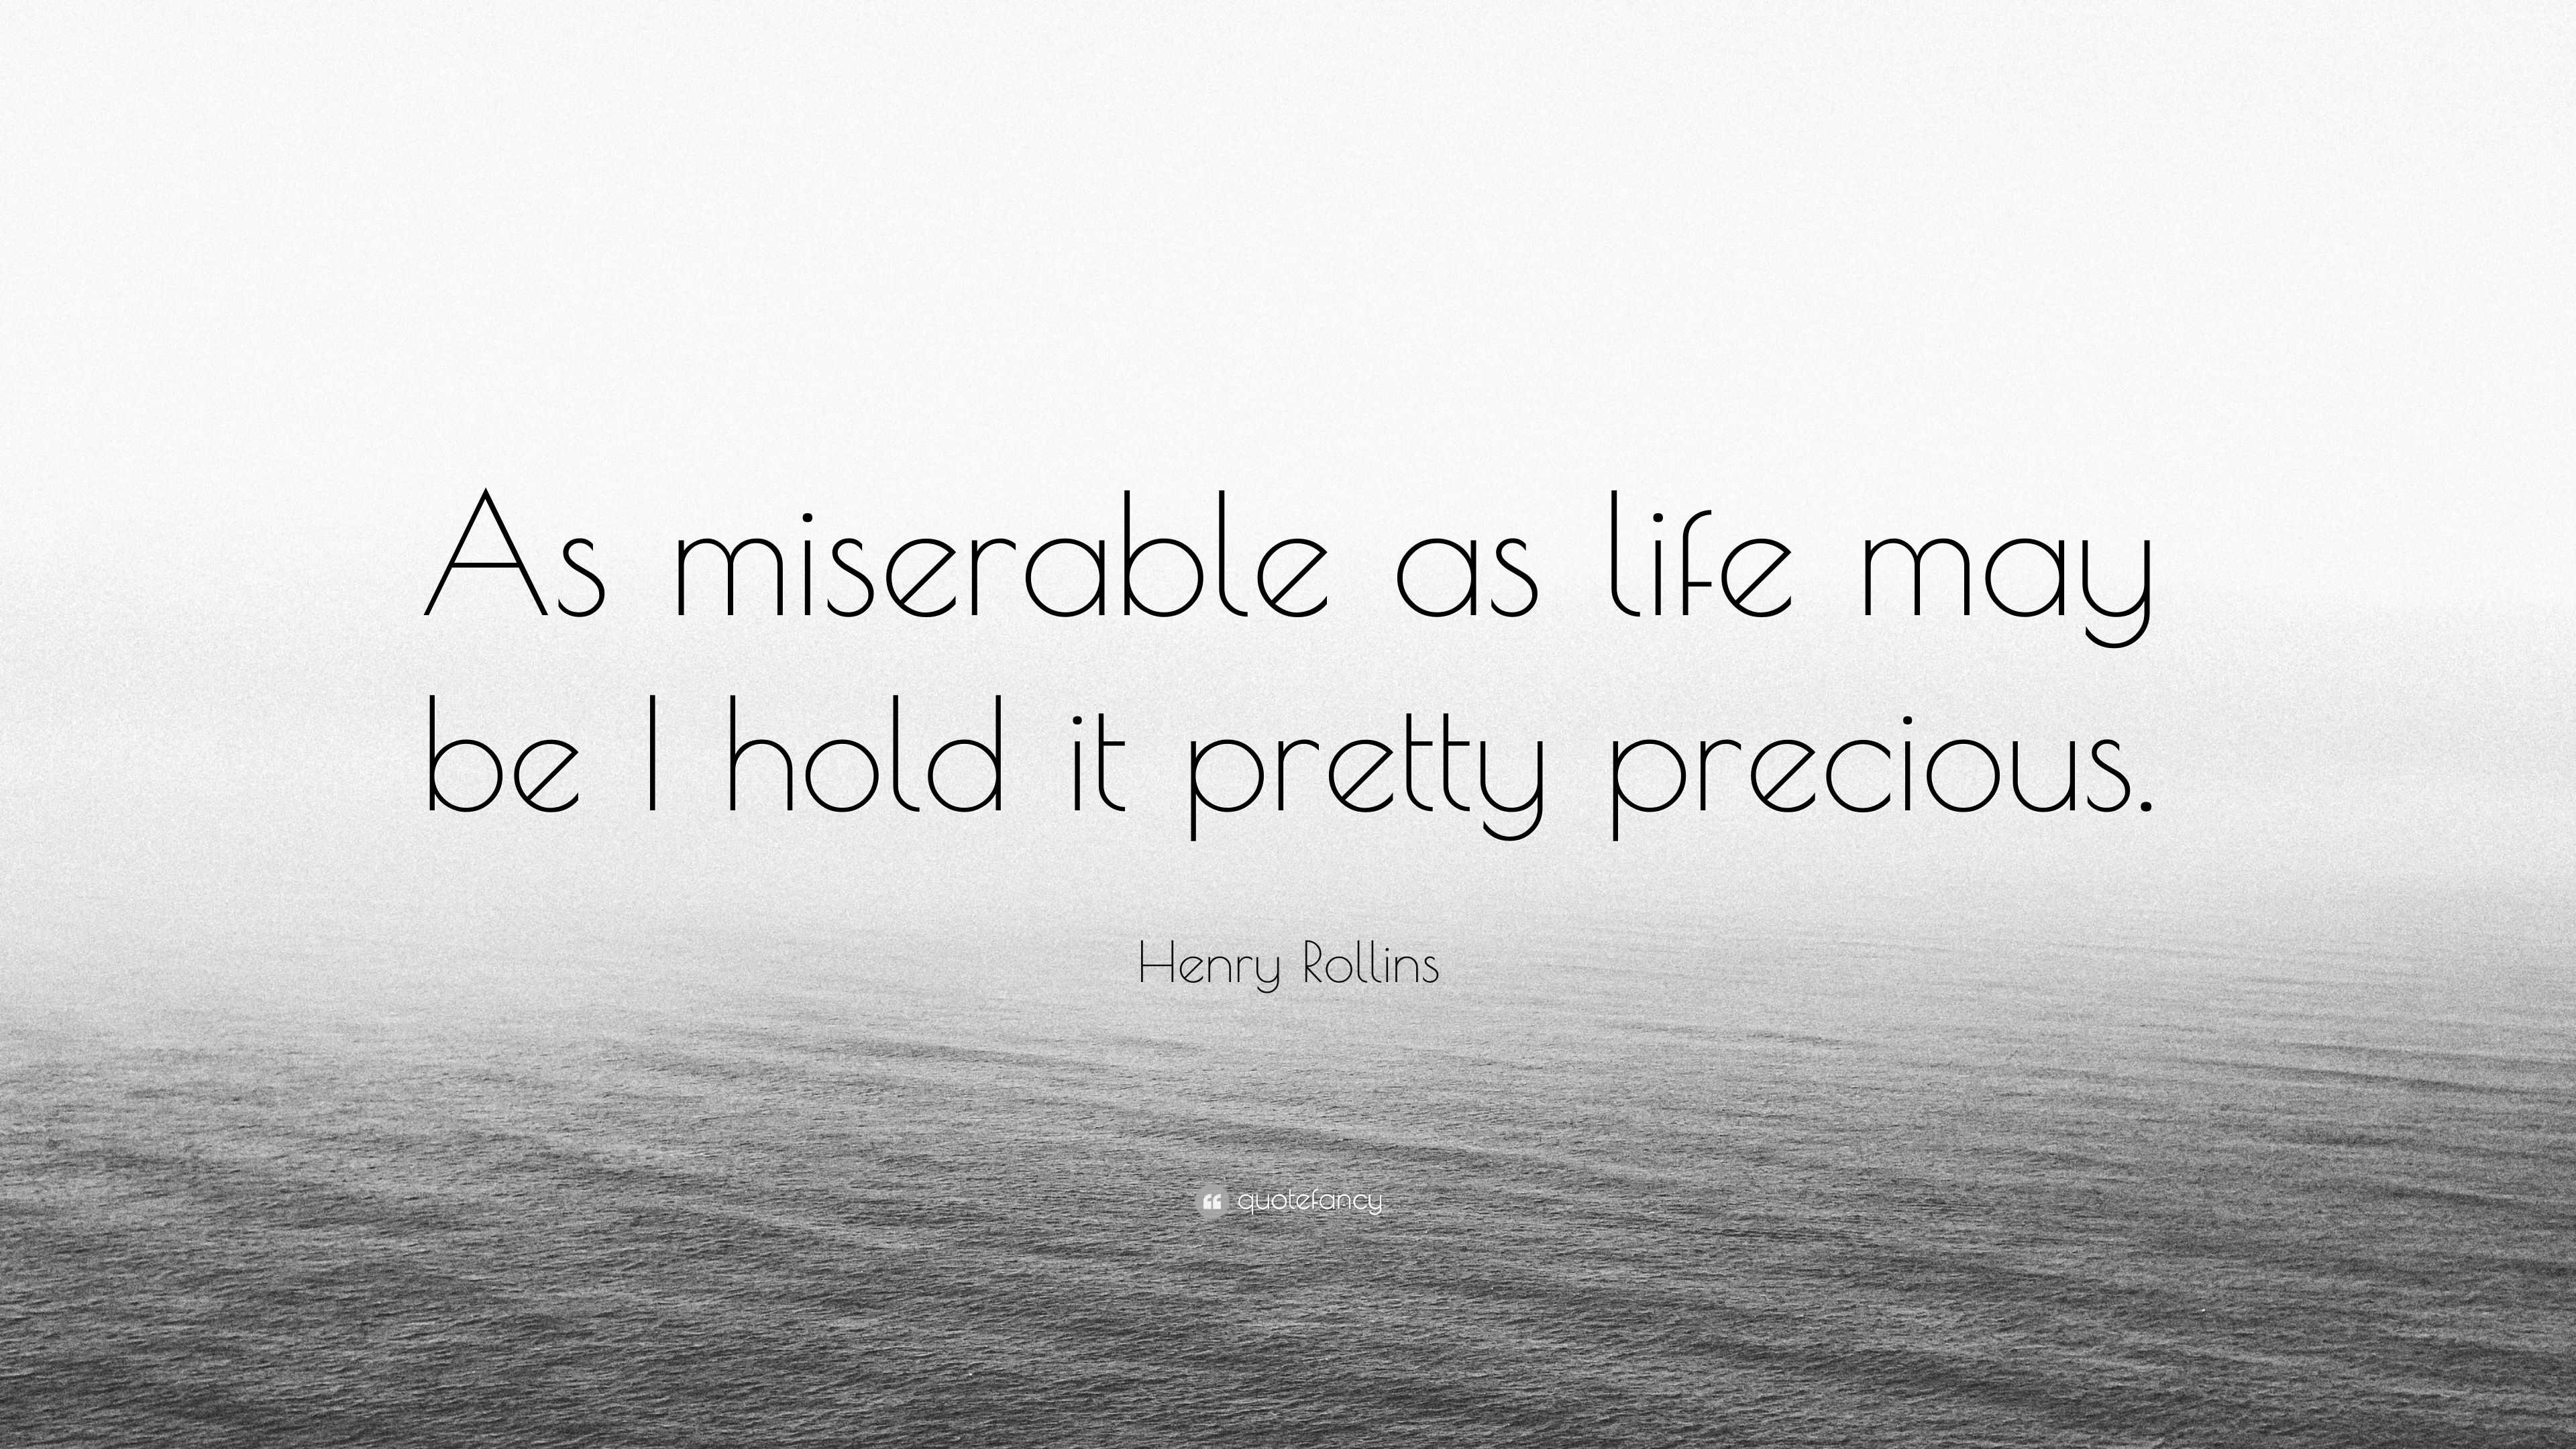 Henry Rollins Quote: "As miserable as life may be I hold it pretty precious." (9 wallpapers ...